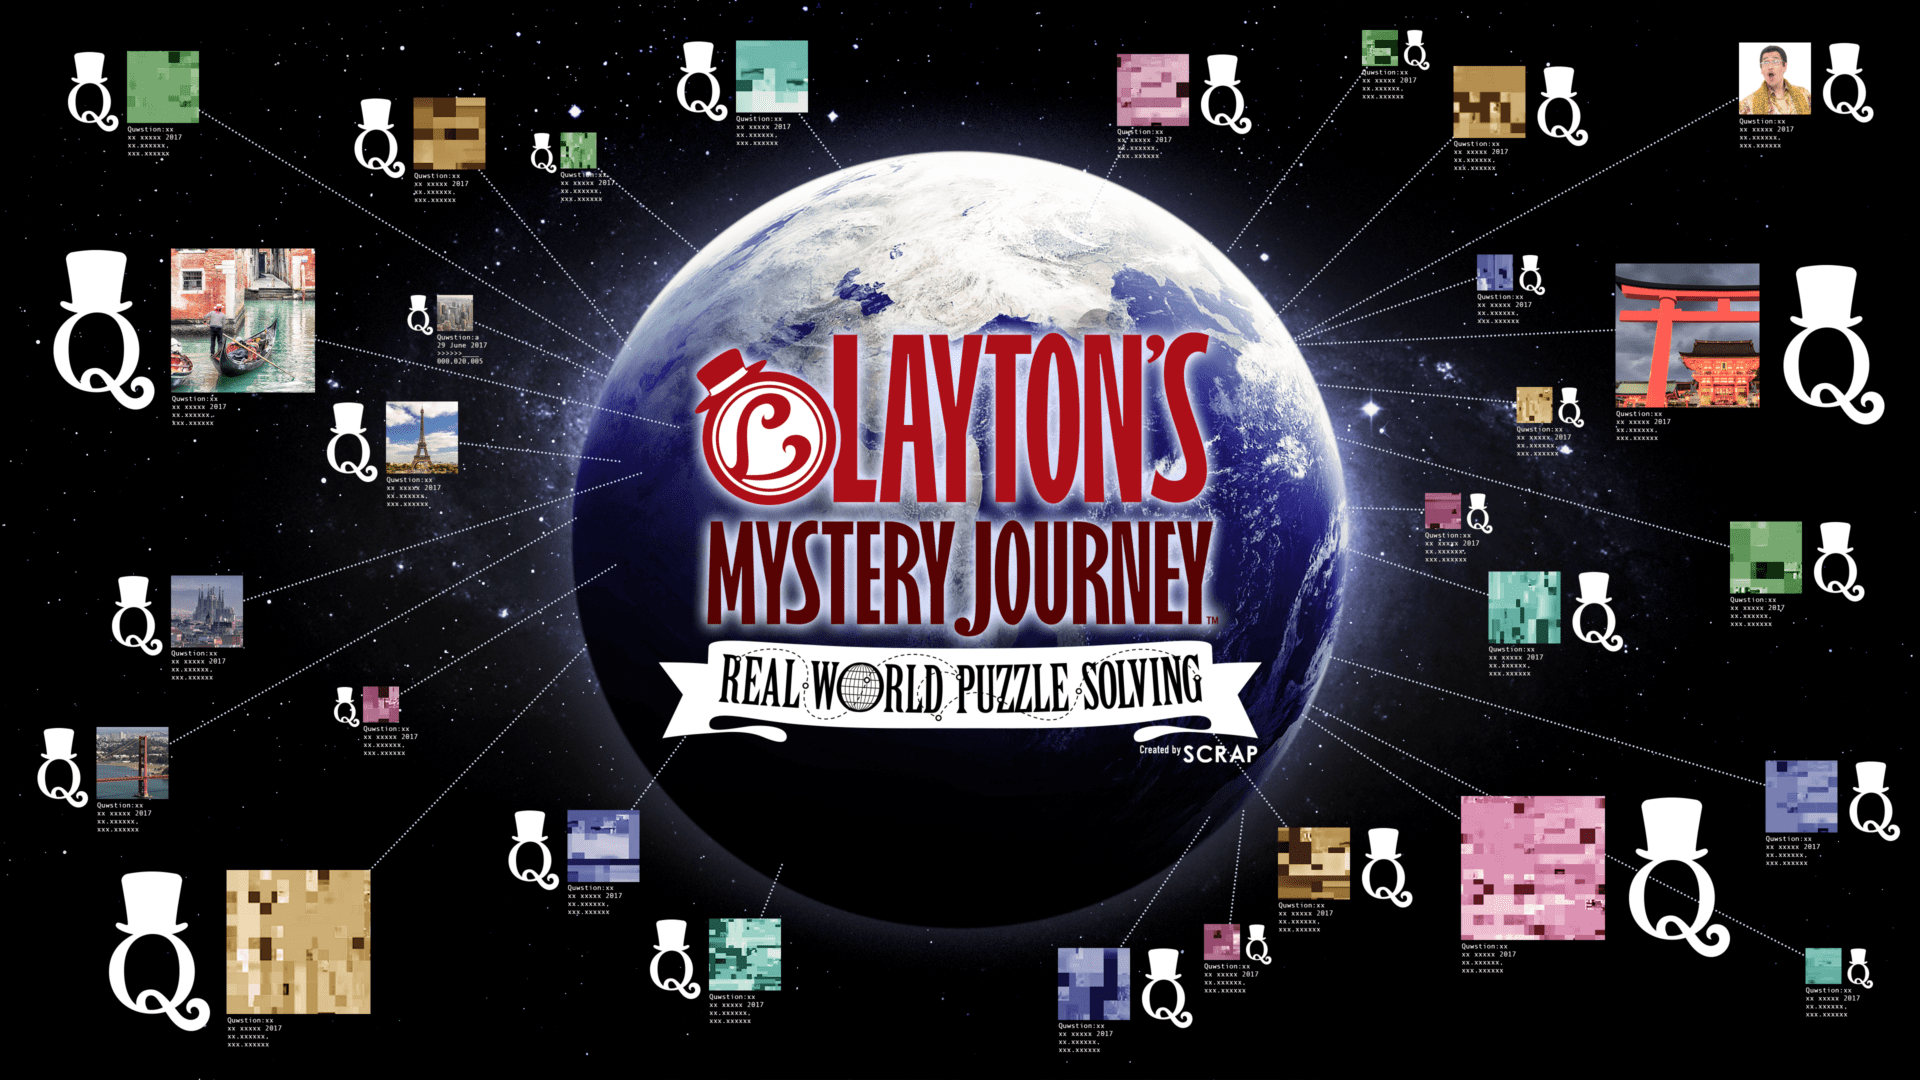 Layton’s Real World Puzzle Solving Launches